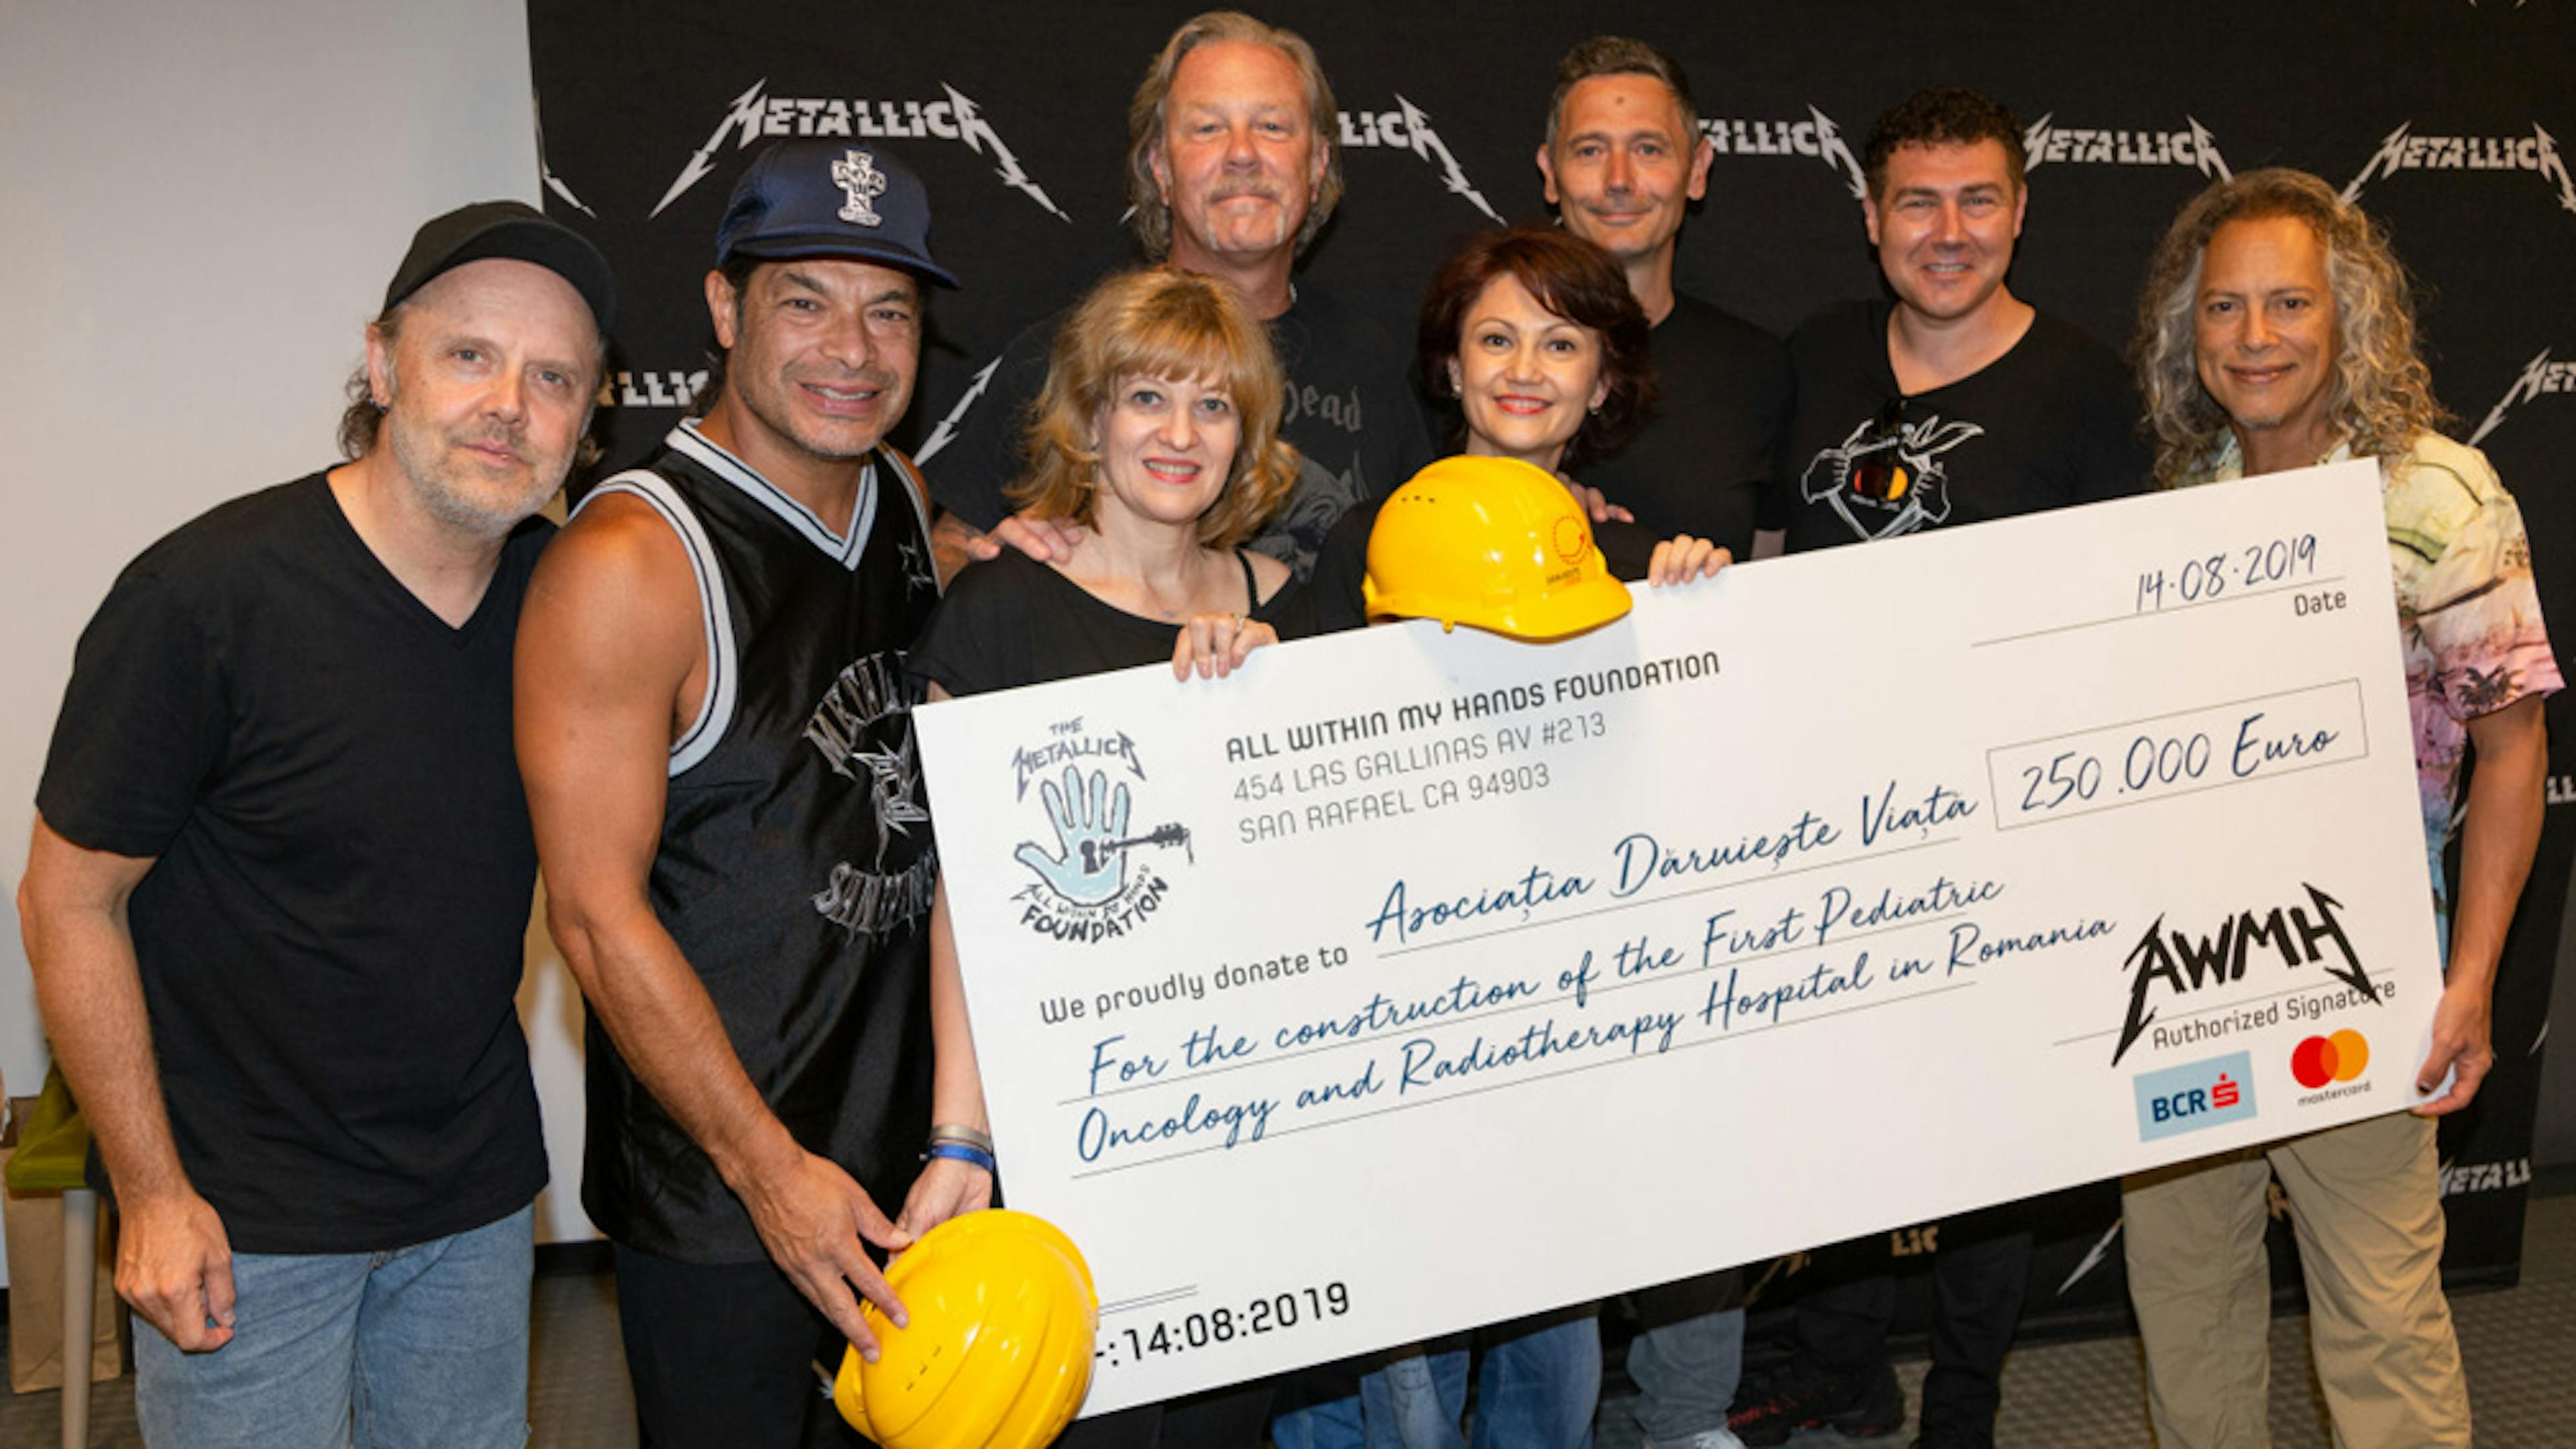 Metallica Donate €250,000 For Romanian Pediatric Oncology And Radiotherapy Hospital